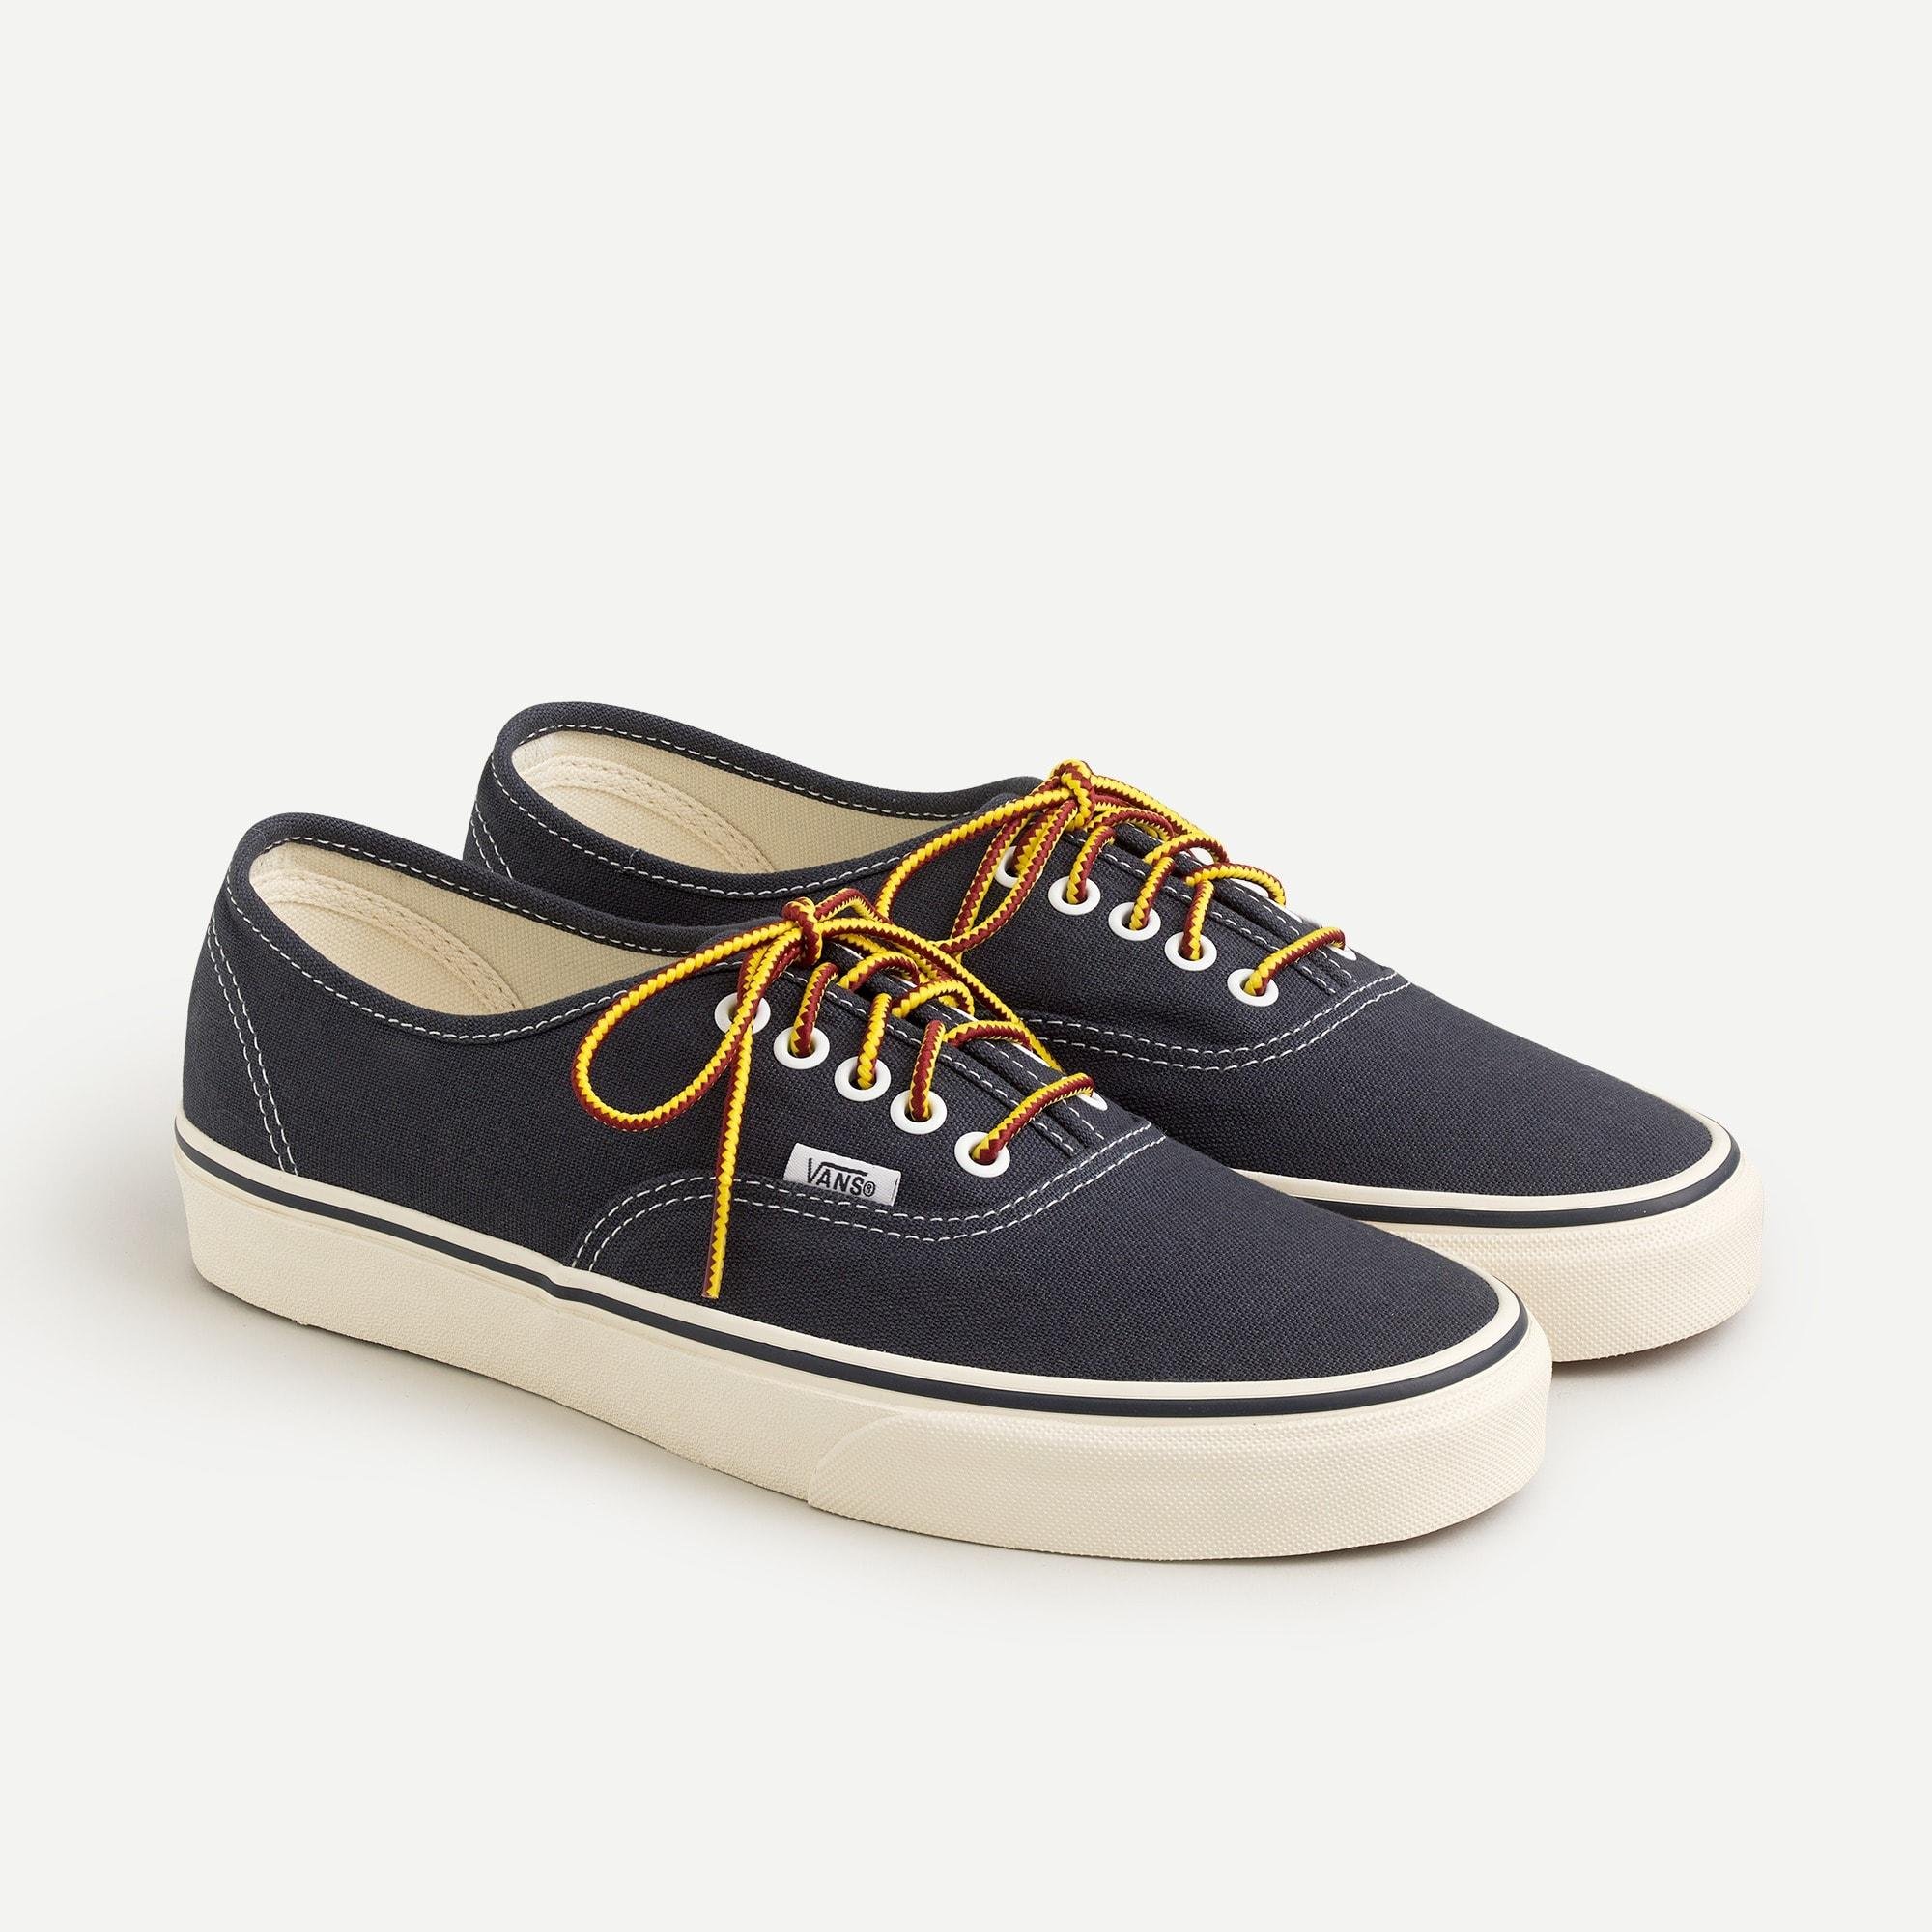 J.crew Washed Canvas Authentic Sneakers 